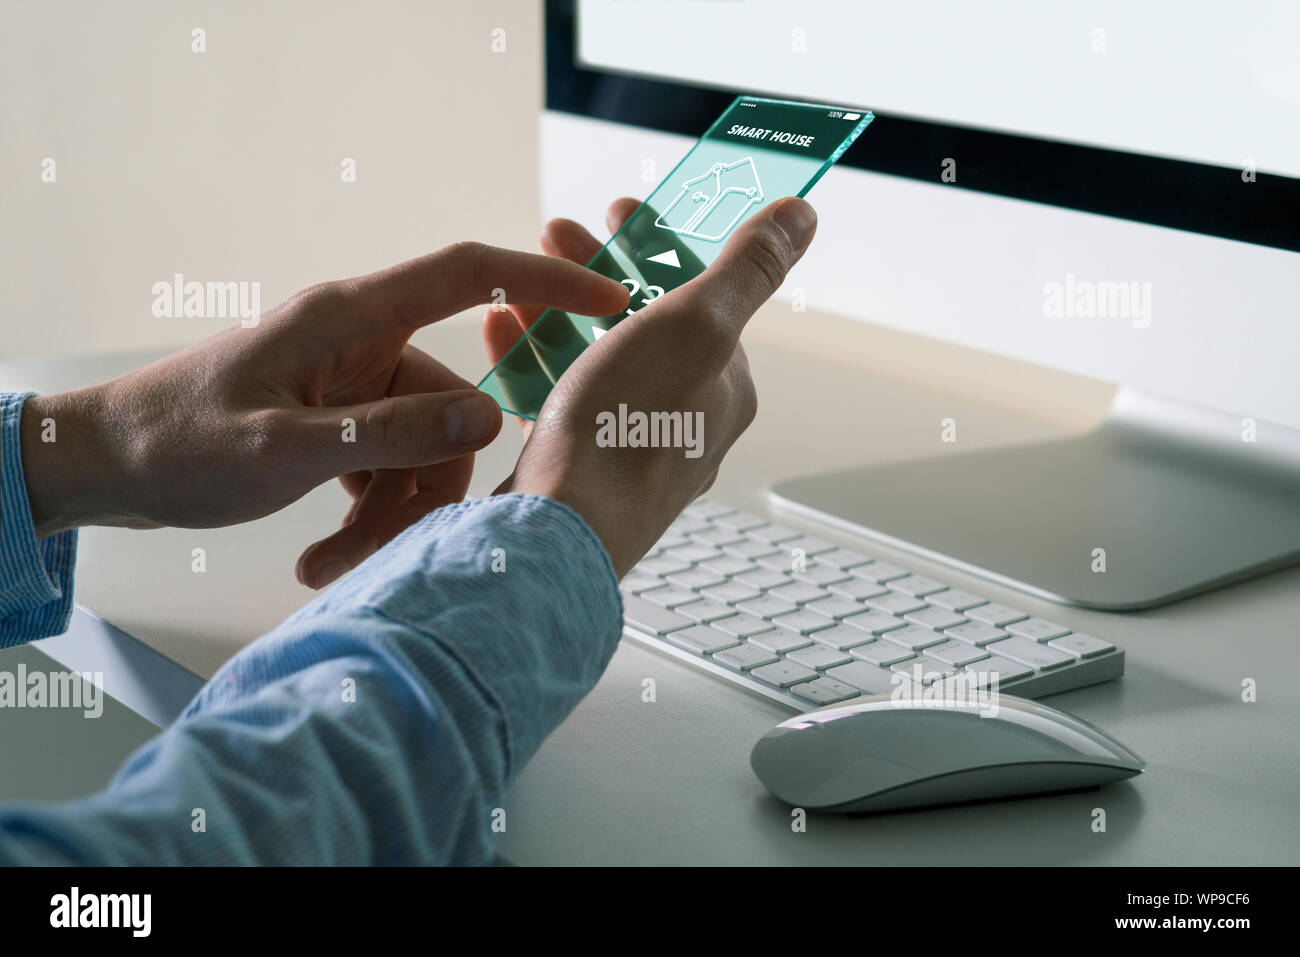 A man uses a futuristic transparent phone with application for control smart house. Stock Photo